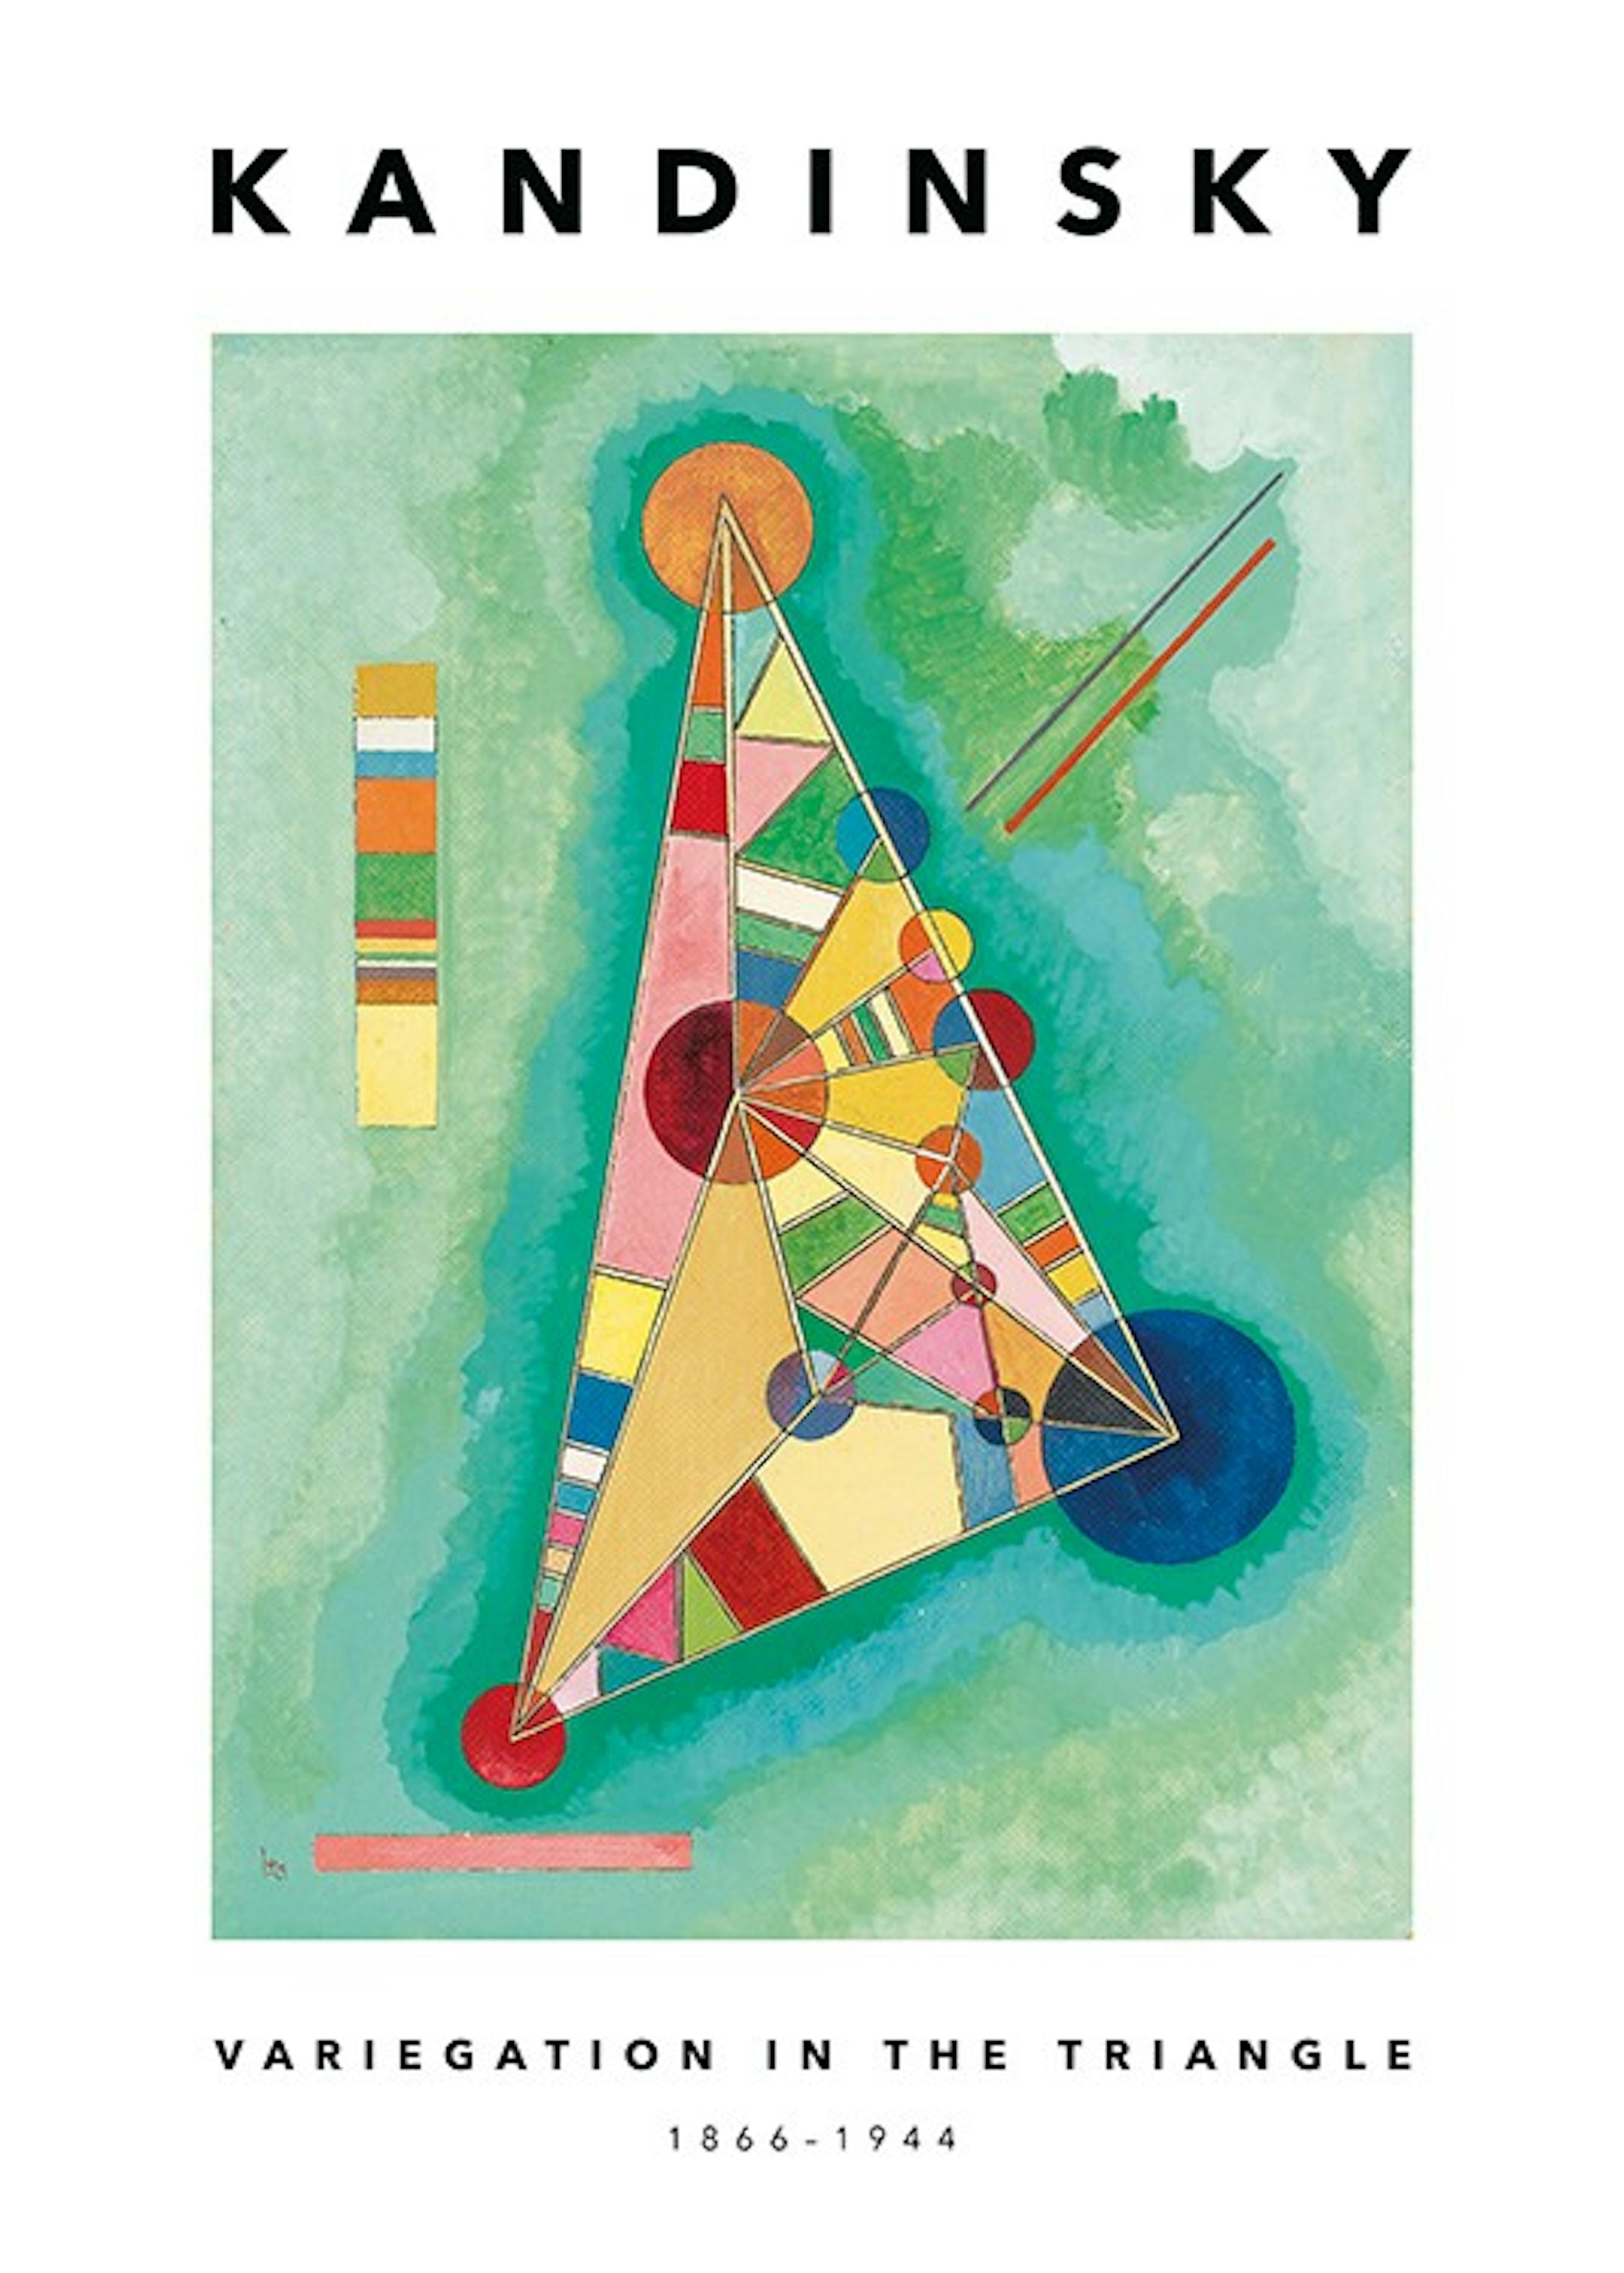 Kandinsky - Variegation in the Triangle Print 0